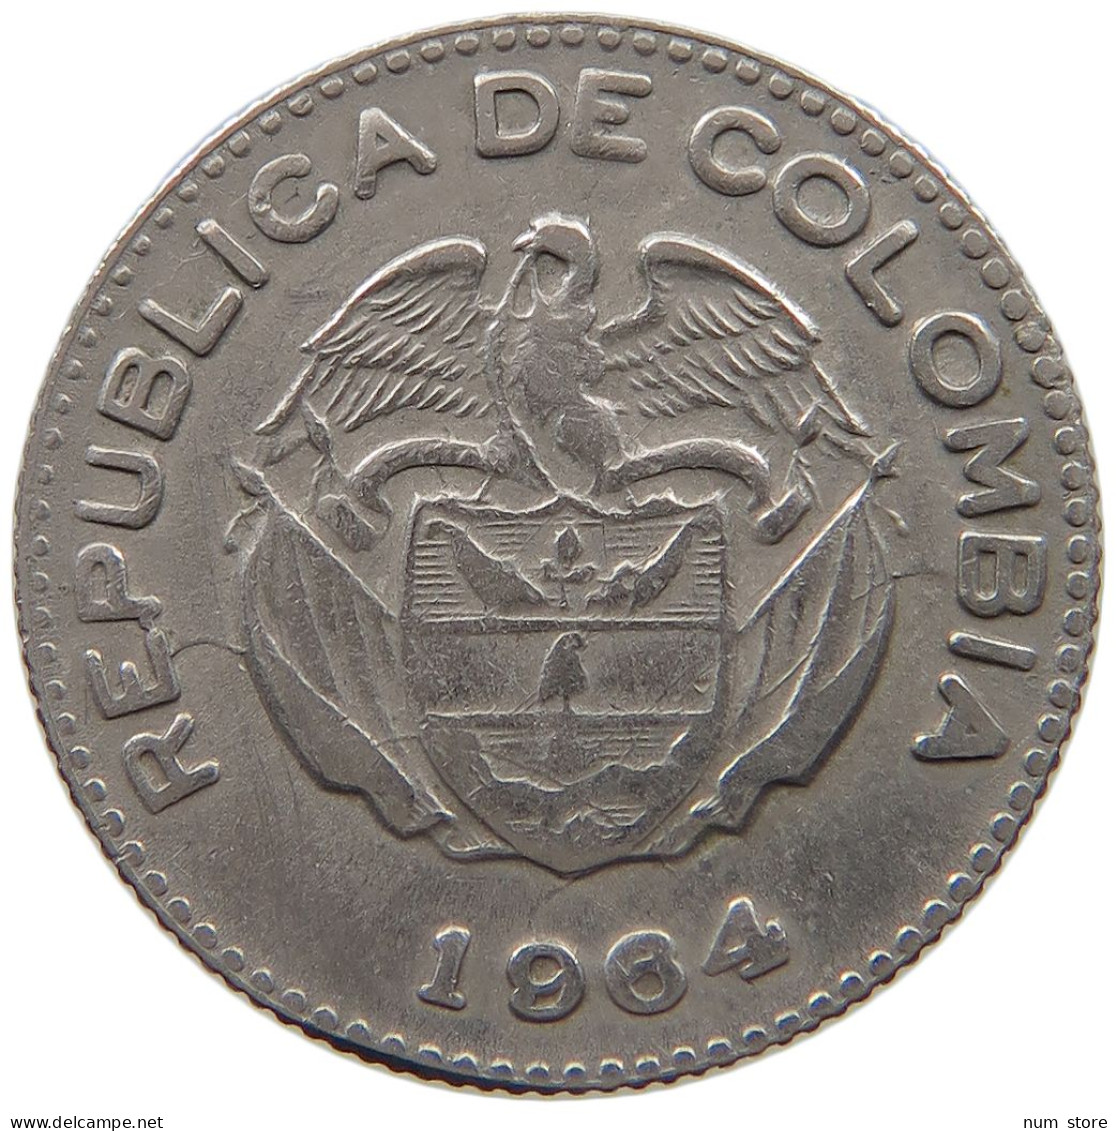 COLOMBIA 10 CENTAVOS 1964  #MA 026055 - Colombia